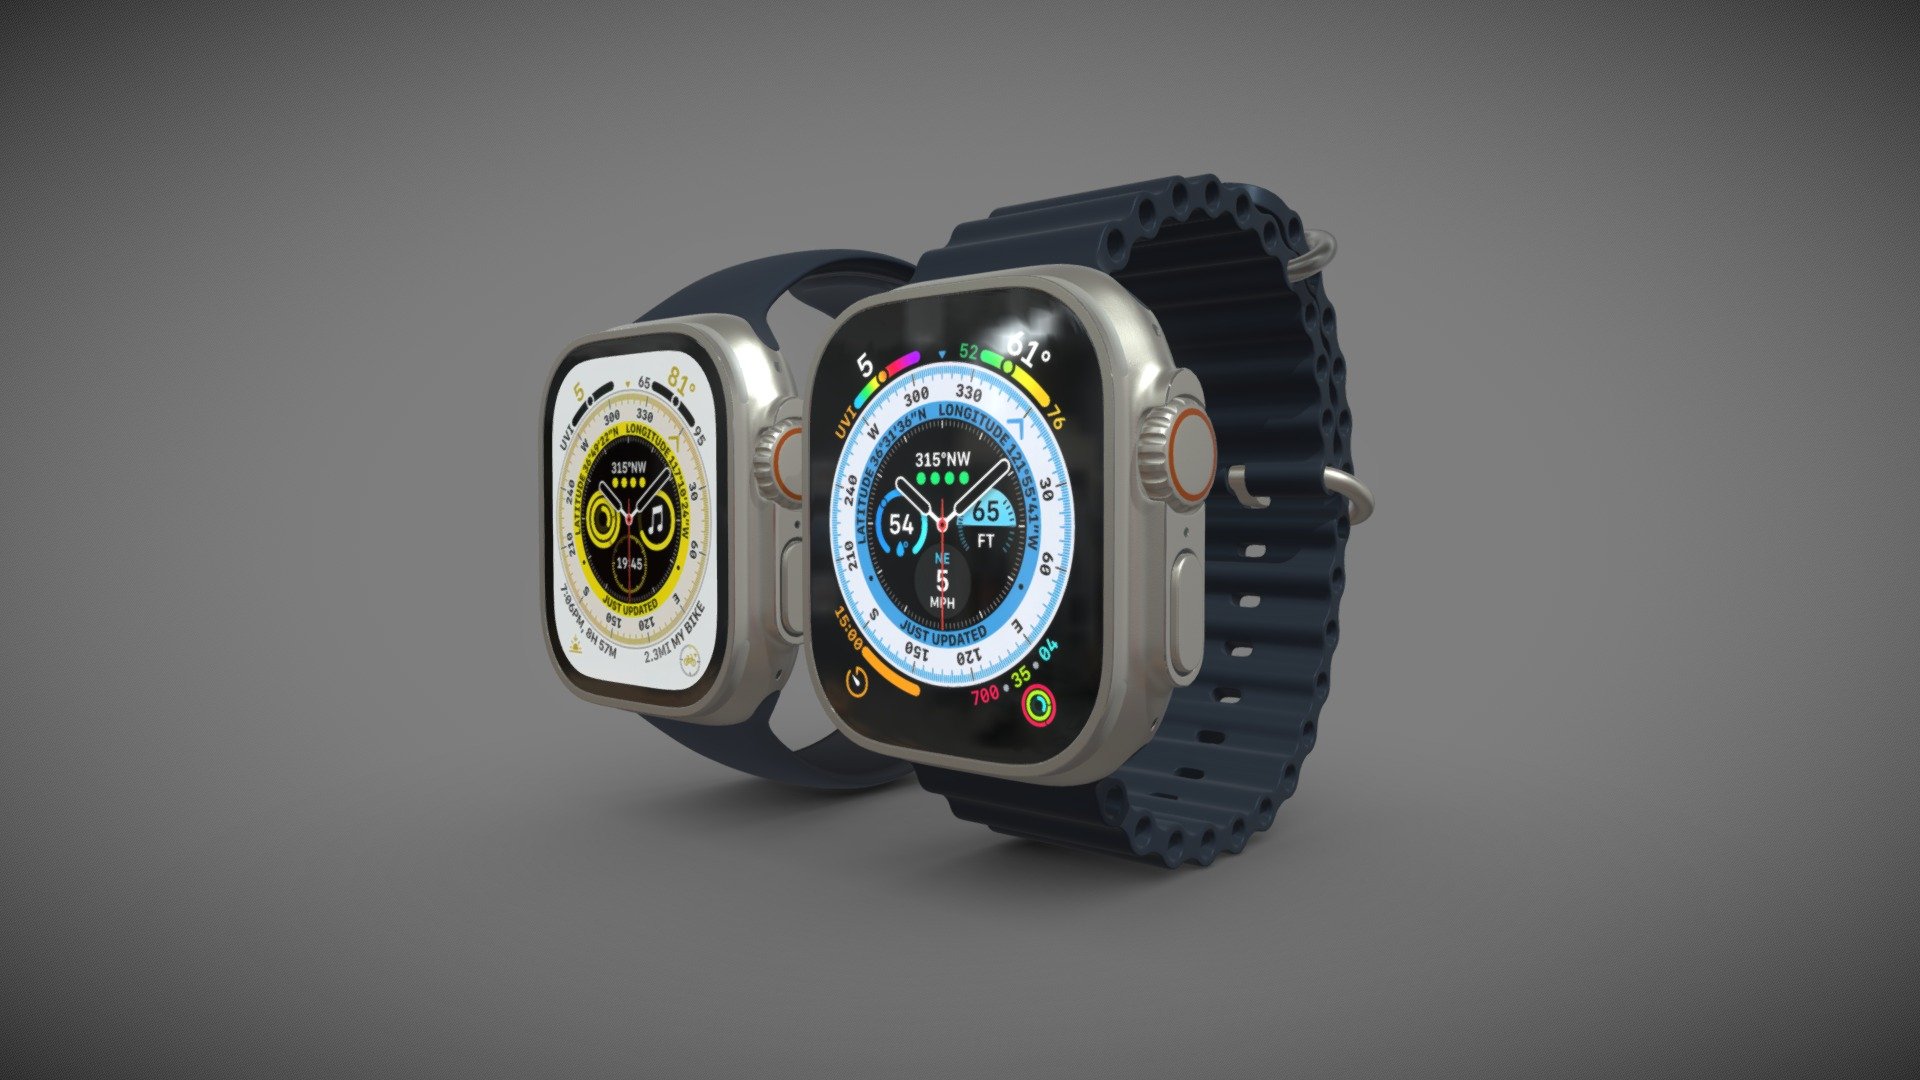 Realistic (copy) 3d model of Apple Watch Ultra.

This set:
- 1 file obj standard
- 1 file 3ds Max 2013 vray material
- 1 file 3ds Max 2013 corona material
- 1 file of 3Ds
- 2 file e3d full set of materials.
- 1 file cinema 4d standard.
- 1 file blender cycles.

Topology of geometry:
- forms and proportions of The 3D model
- the geometry of the model was created very neatly
- there are no many-sided polygons
- detailed enough for close-up renders
- the model optimized for turbosmooth modifier
- Not collapsed the turbosmooth modified
- apply the Smooth modifier with a parameter to get the desired level of detail

Materials and Textures:
- 3ds max files included Vray-Shaders
- 3ds max files included Corona-Shaders
- Blender files included cycles shaders
- Cinema 4d files included Standard-Shaders
- Element 3d files
- all texture paths are cleared

Organization of scene:
- to all objects and materials
- real world size (system units - mm)
- coordinates of location of the model in space (x0, y0, z0) - Apple Watch Ultra - Buy Royalty Free 3D model by madMIX 3d model